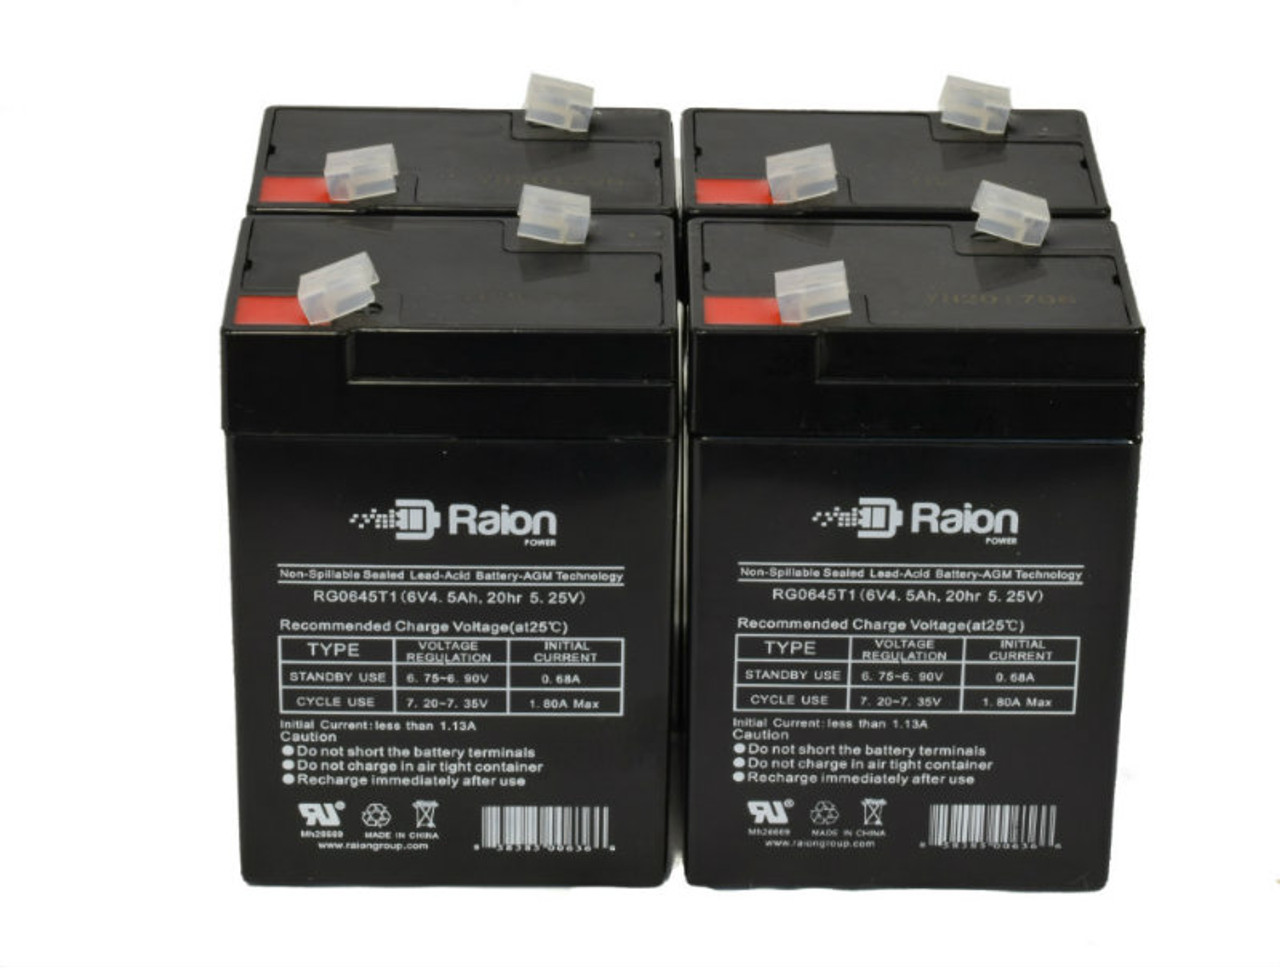 Raion Power 6V 4.5Ah Replacement Emergency Light Battery for Sure-Lites 262 - 4 Pack